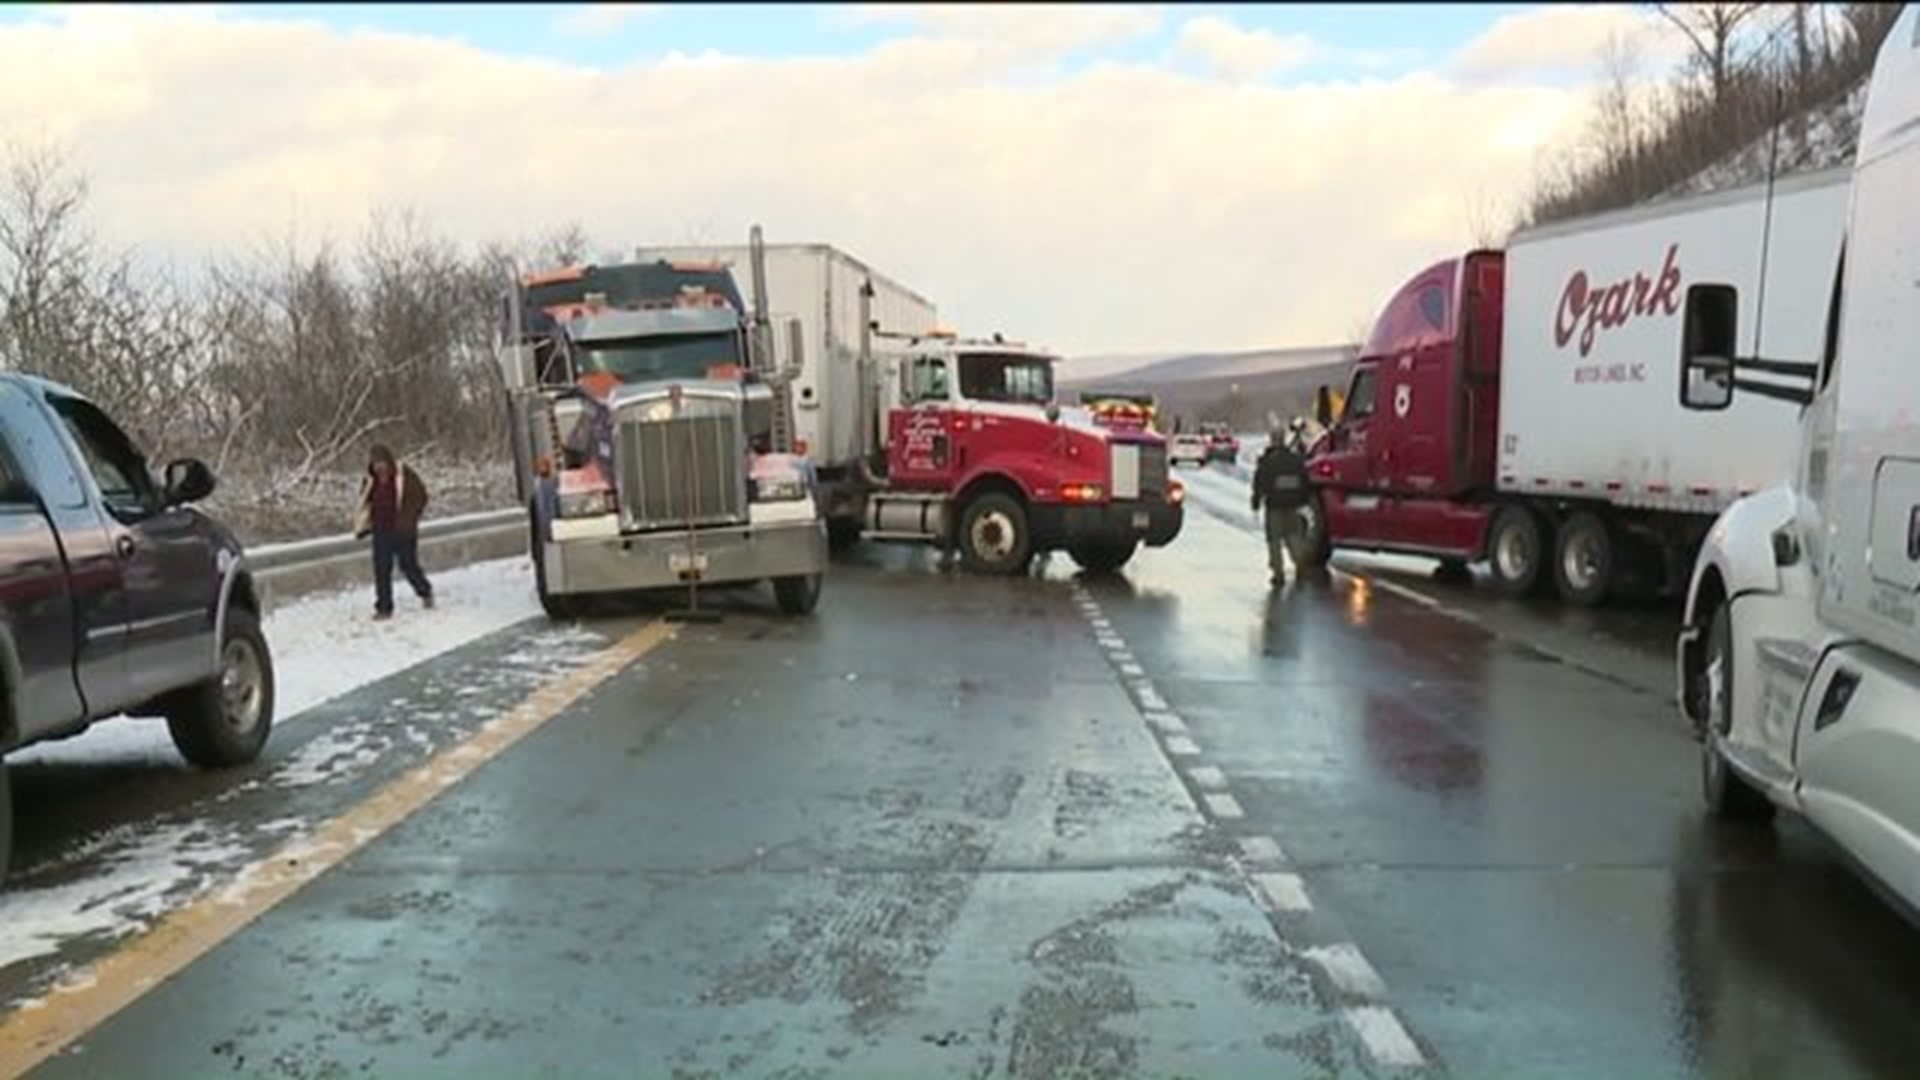 UPDATE: Crashes on Interstate 81 in Luzerne County Snarl Traffic